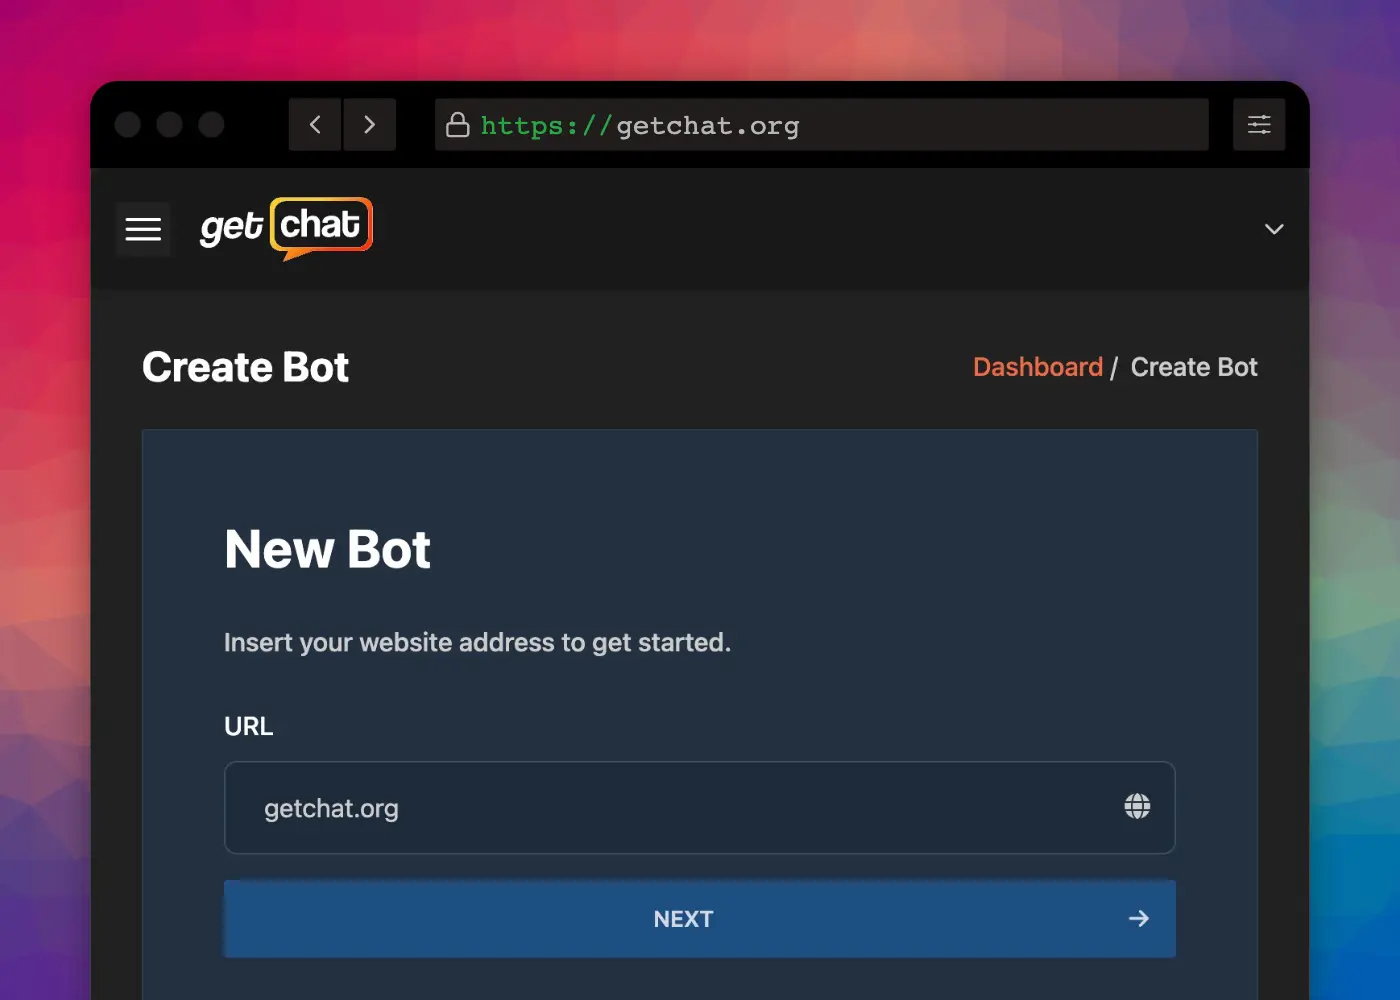 Create a new Bot: Insert your website address to get started